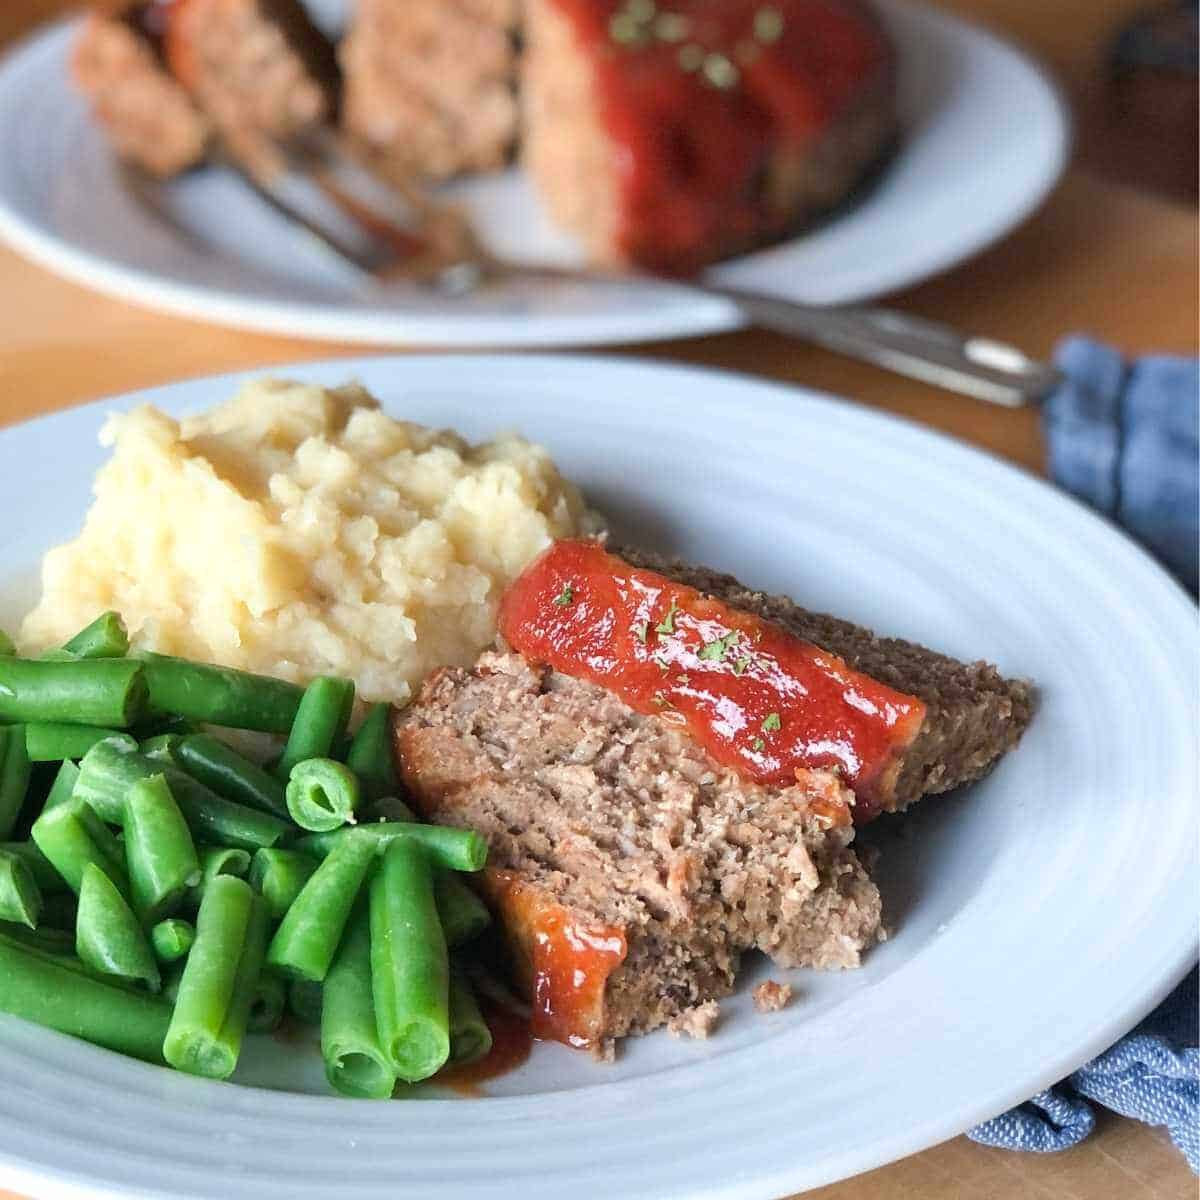 Eggless meatloaf on a plate with mashed potatoes and green beans